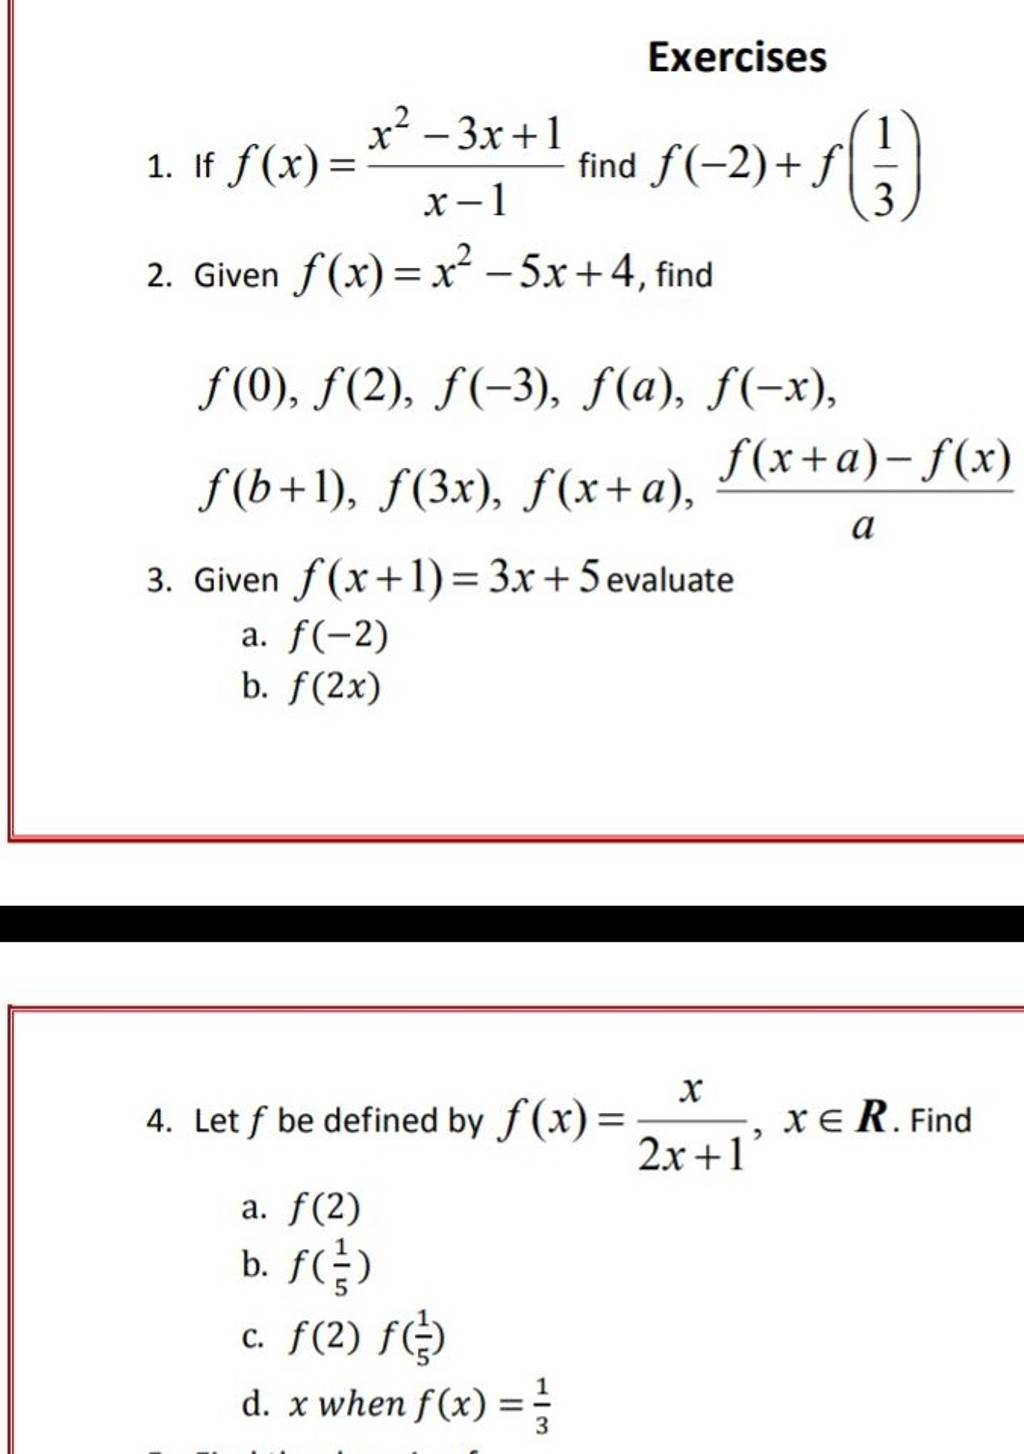 Let f be defined by f(x)=2x+1x​,x∈R. Find